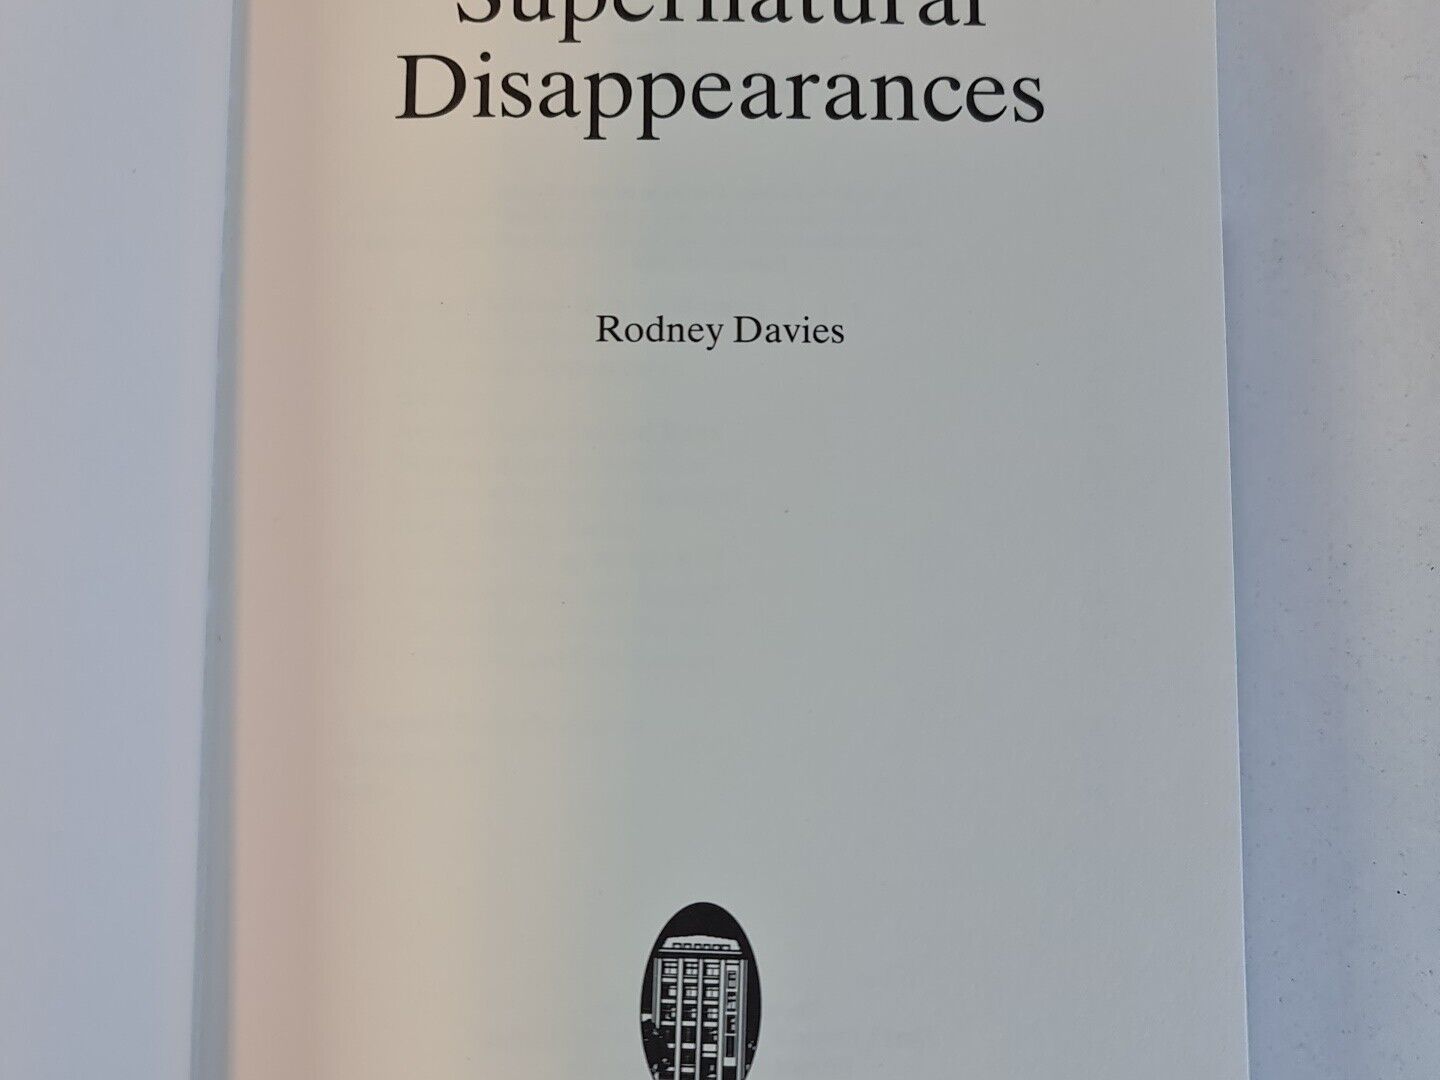 Supernatural Disappearances by Rodney Davies (1995)